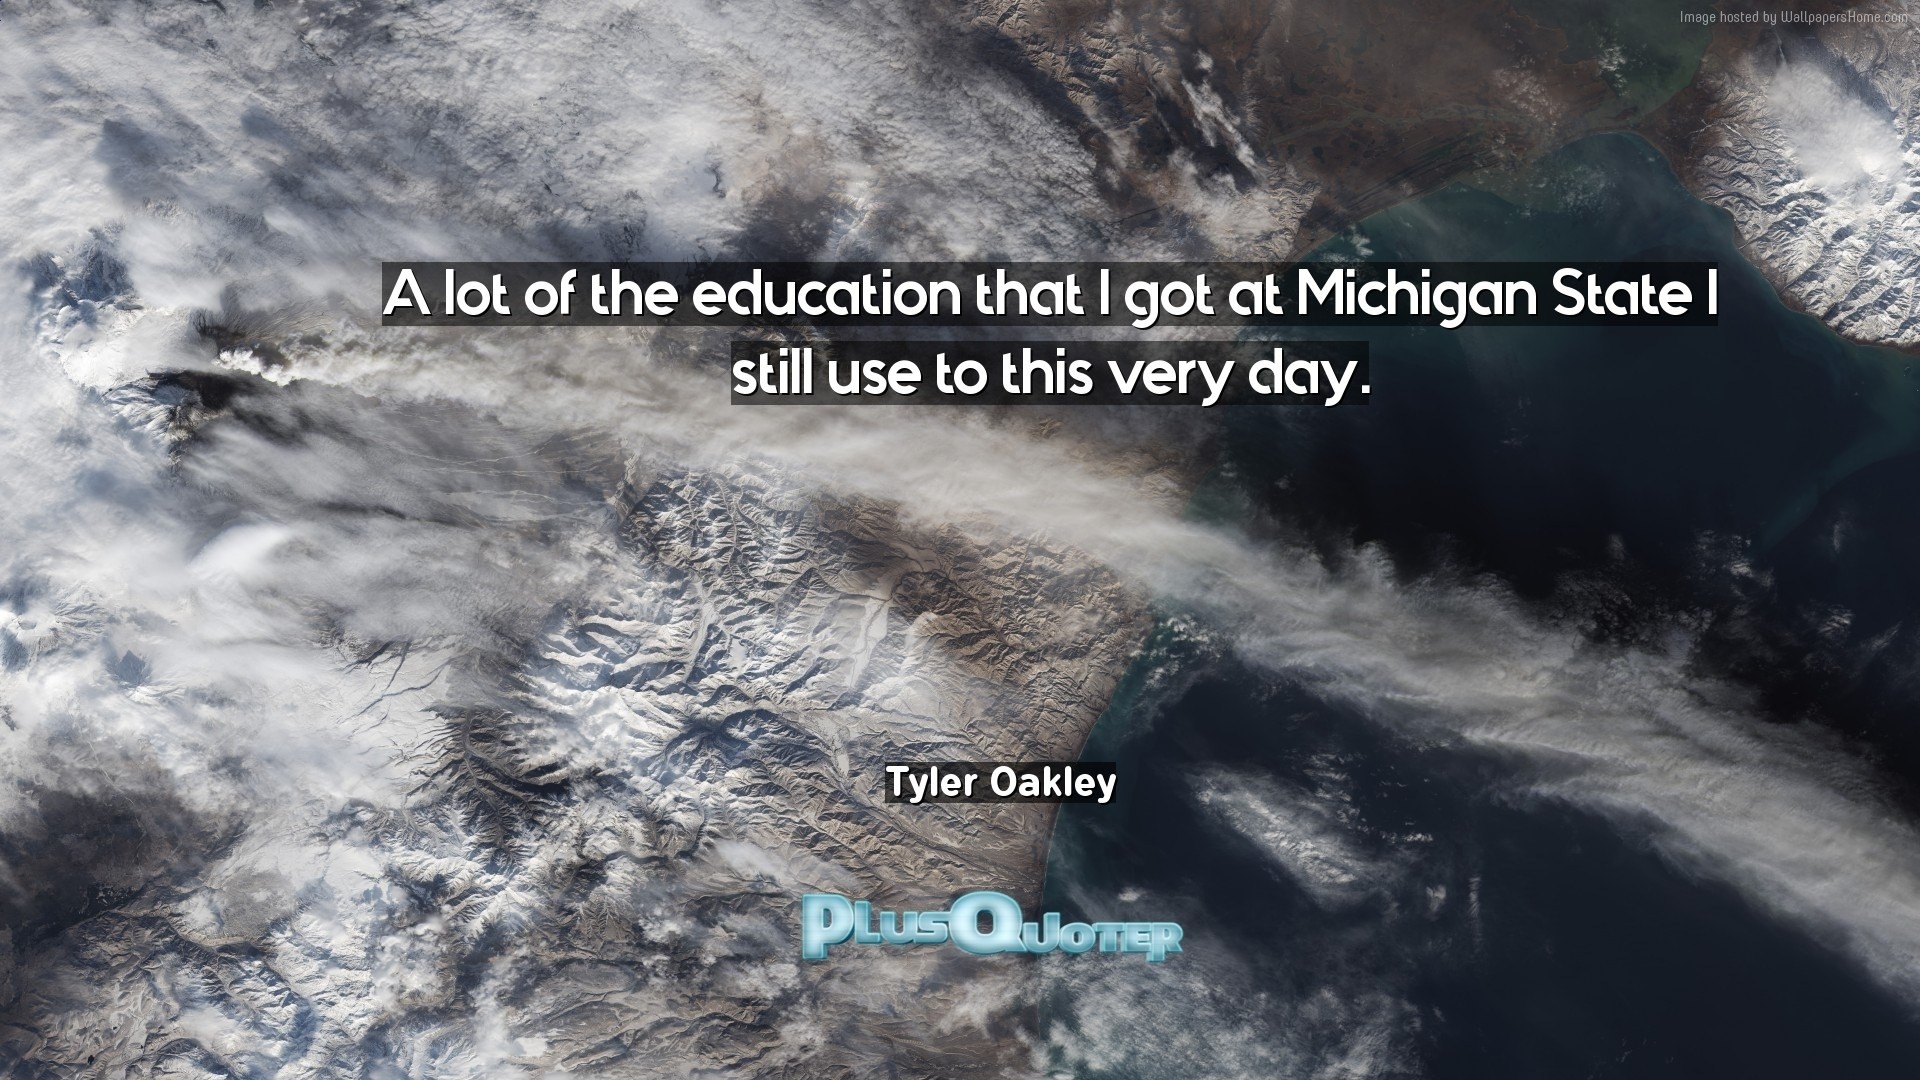 1920x1080 Download Wallpaper with inspirational Quotes- "A lot of the education that  I got at